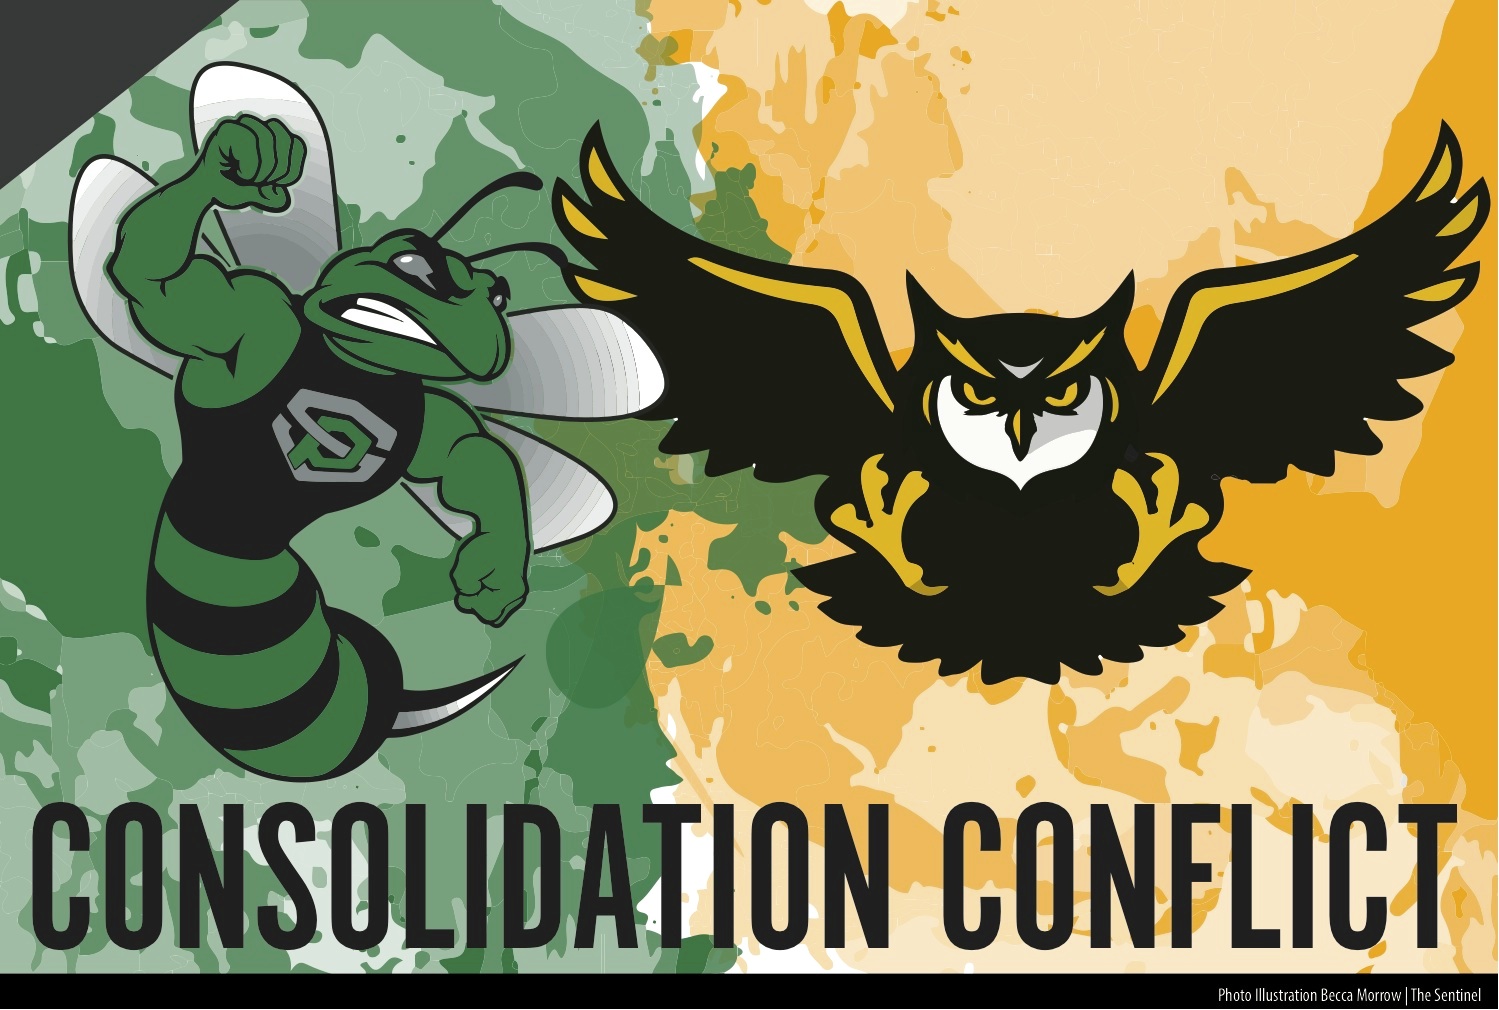 CONSOLIDATION CONFLICT